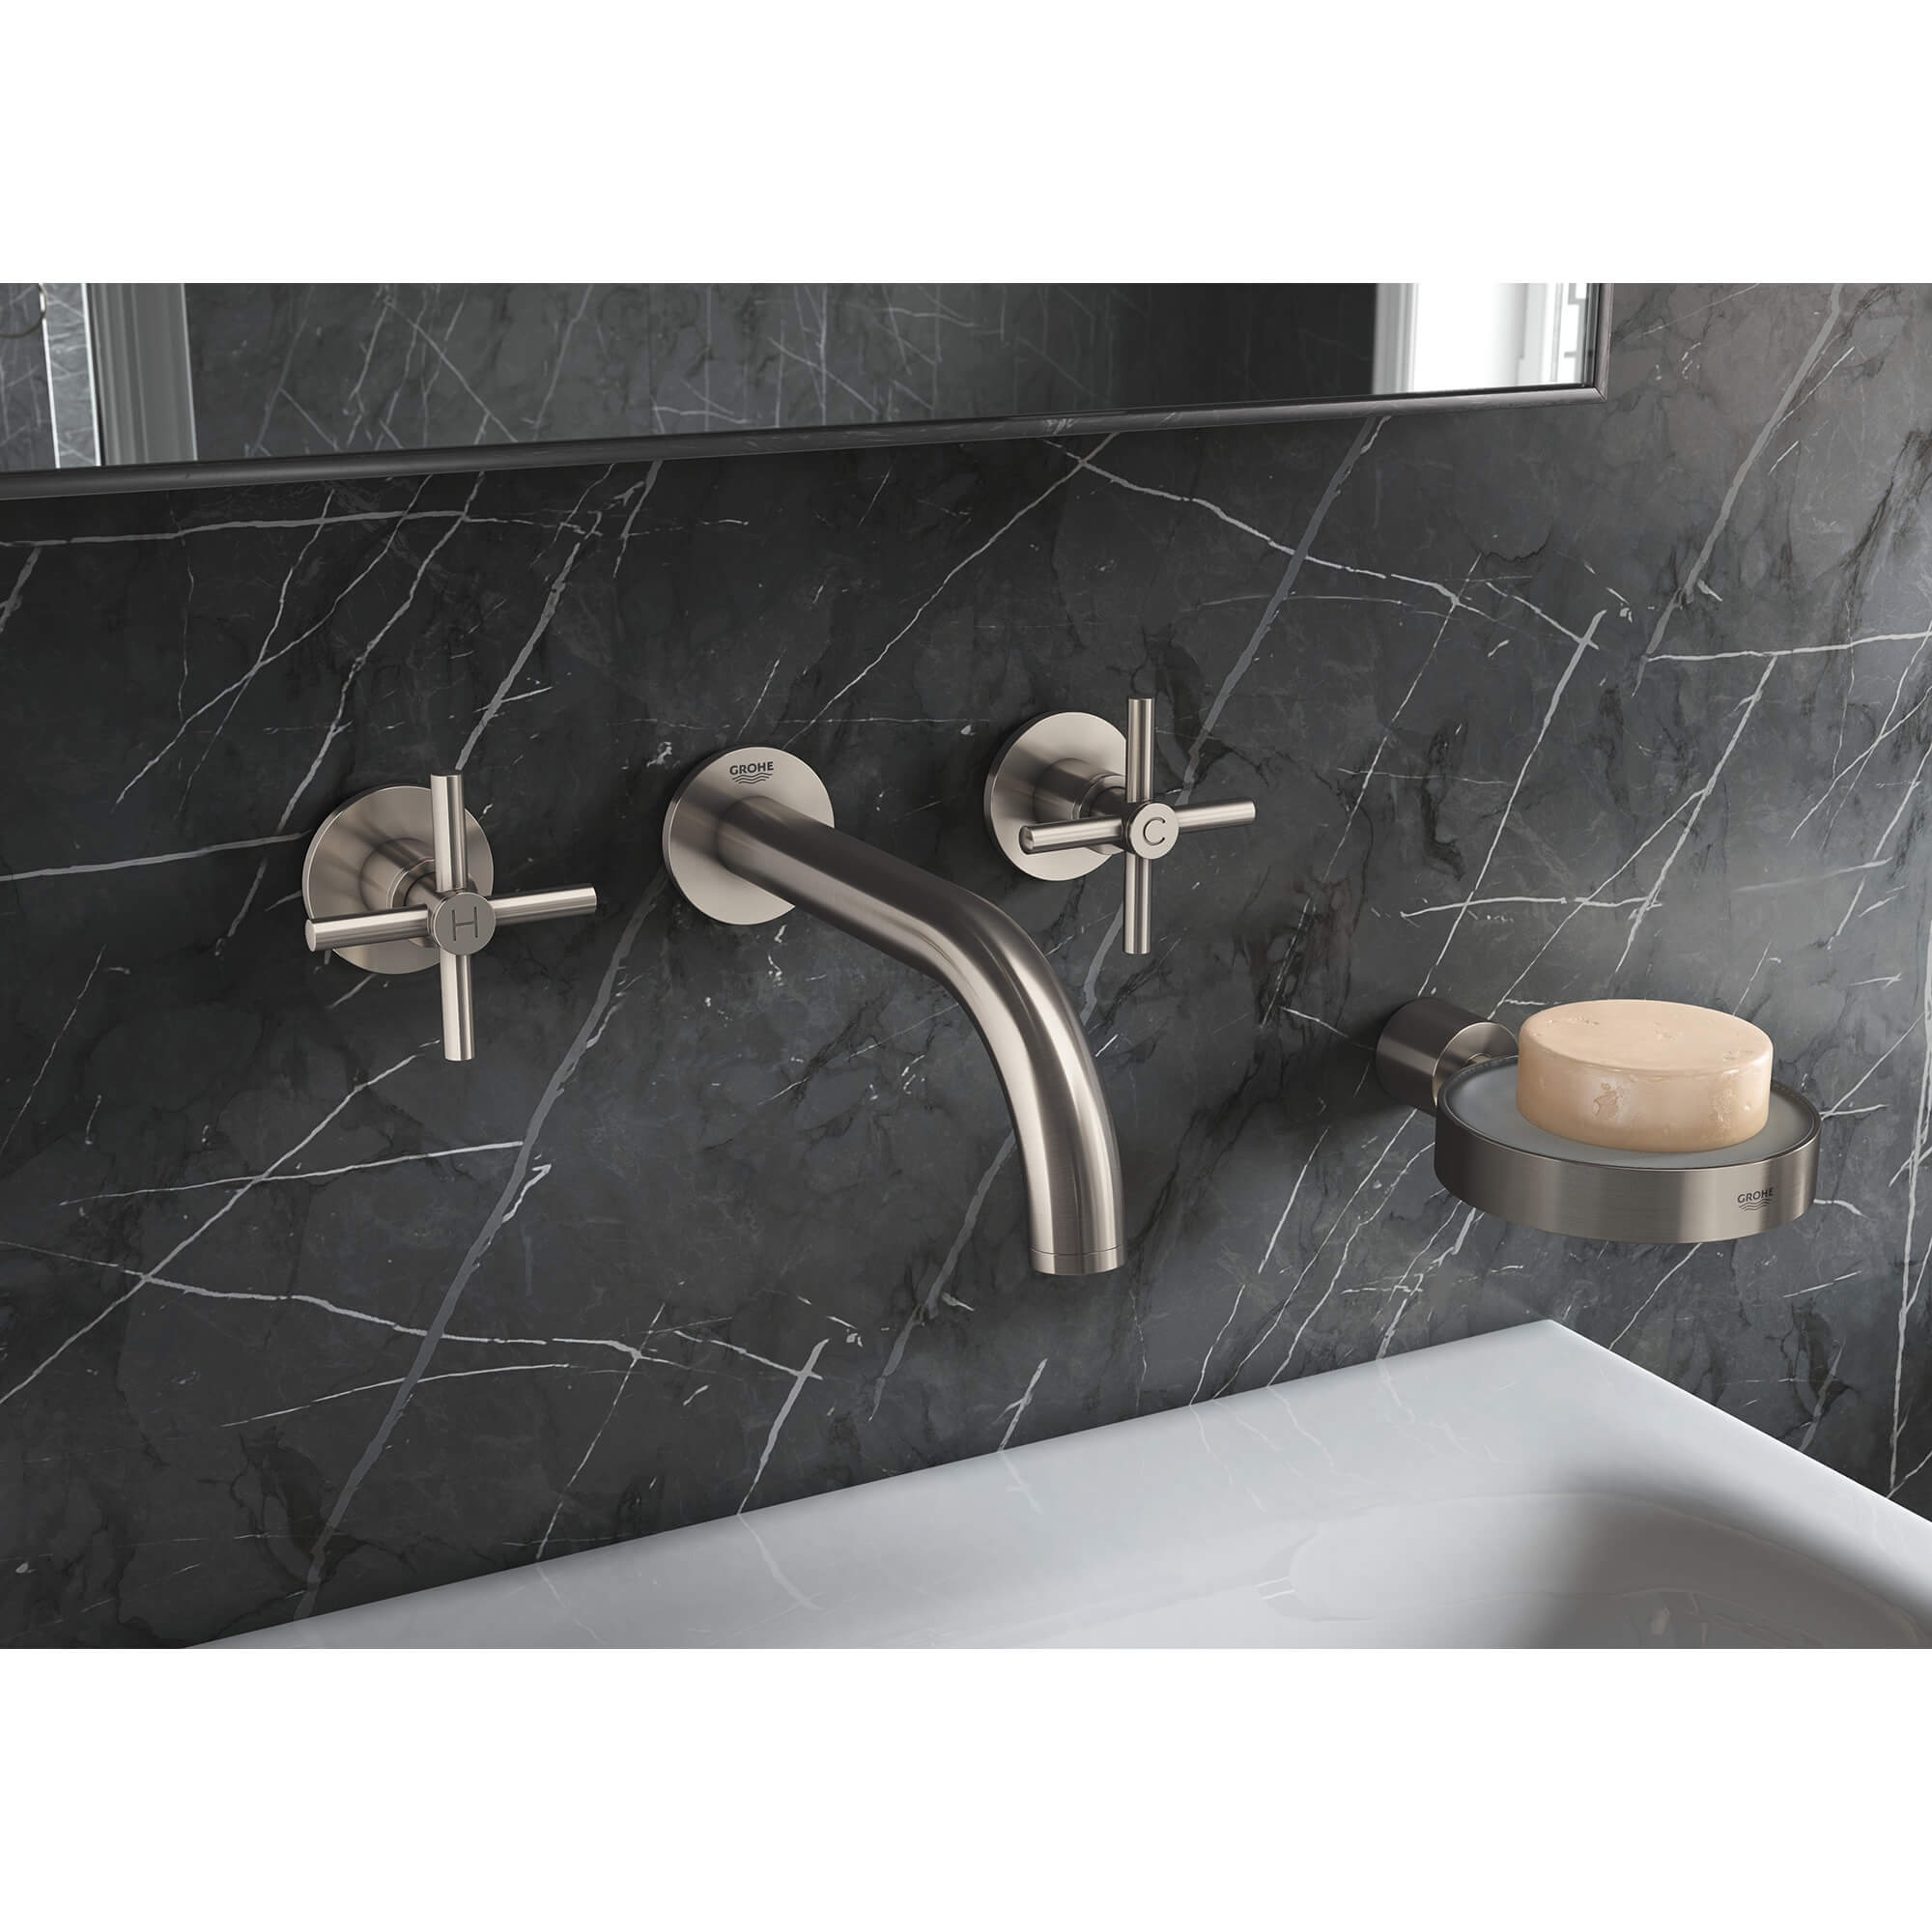 Support pour porte savon GROHE BRUSHED NICKEL